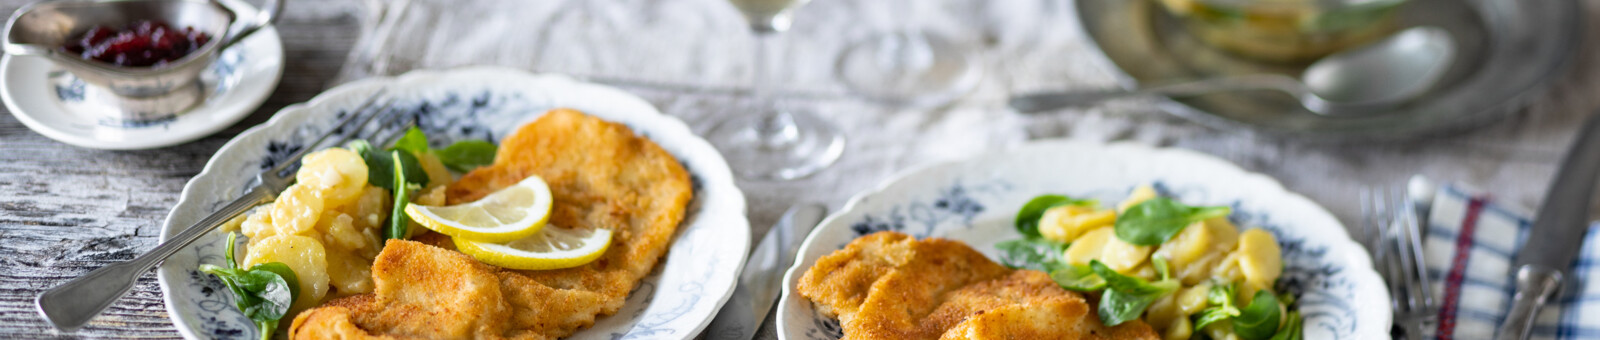     Wiener Schnitzel (a breaded and fried veal escalope) 